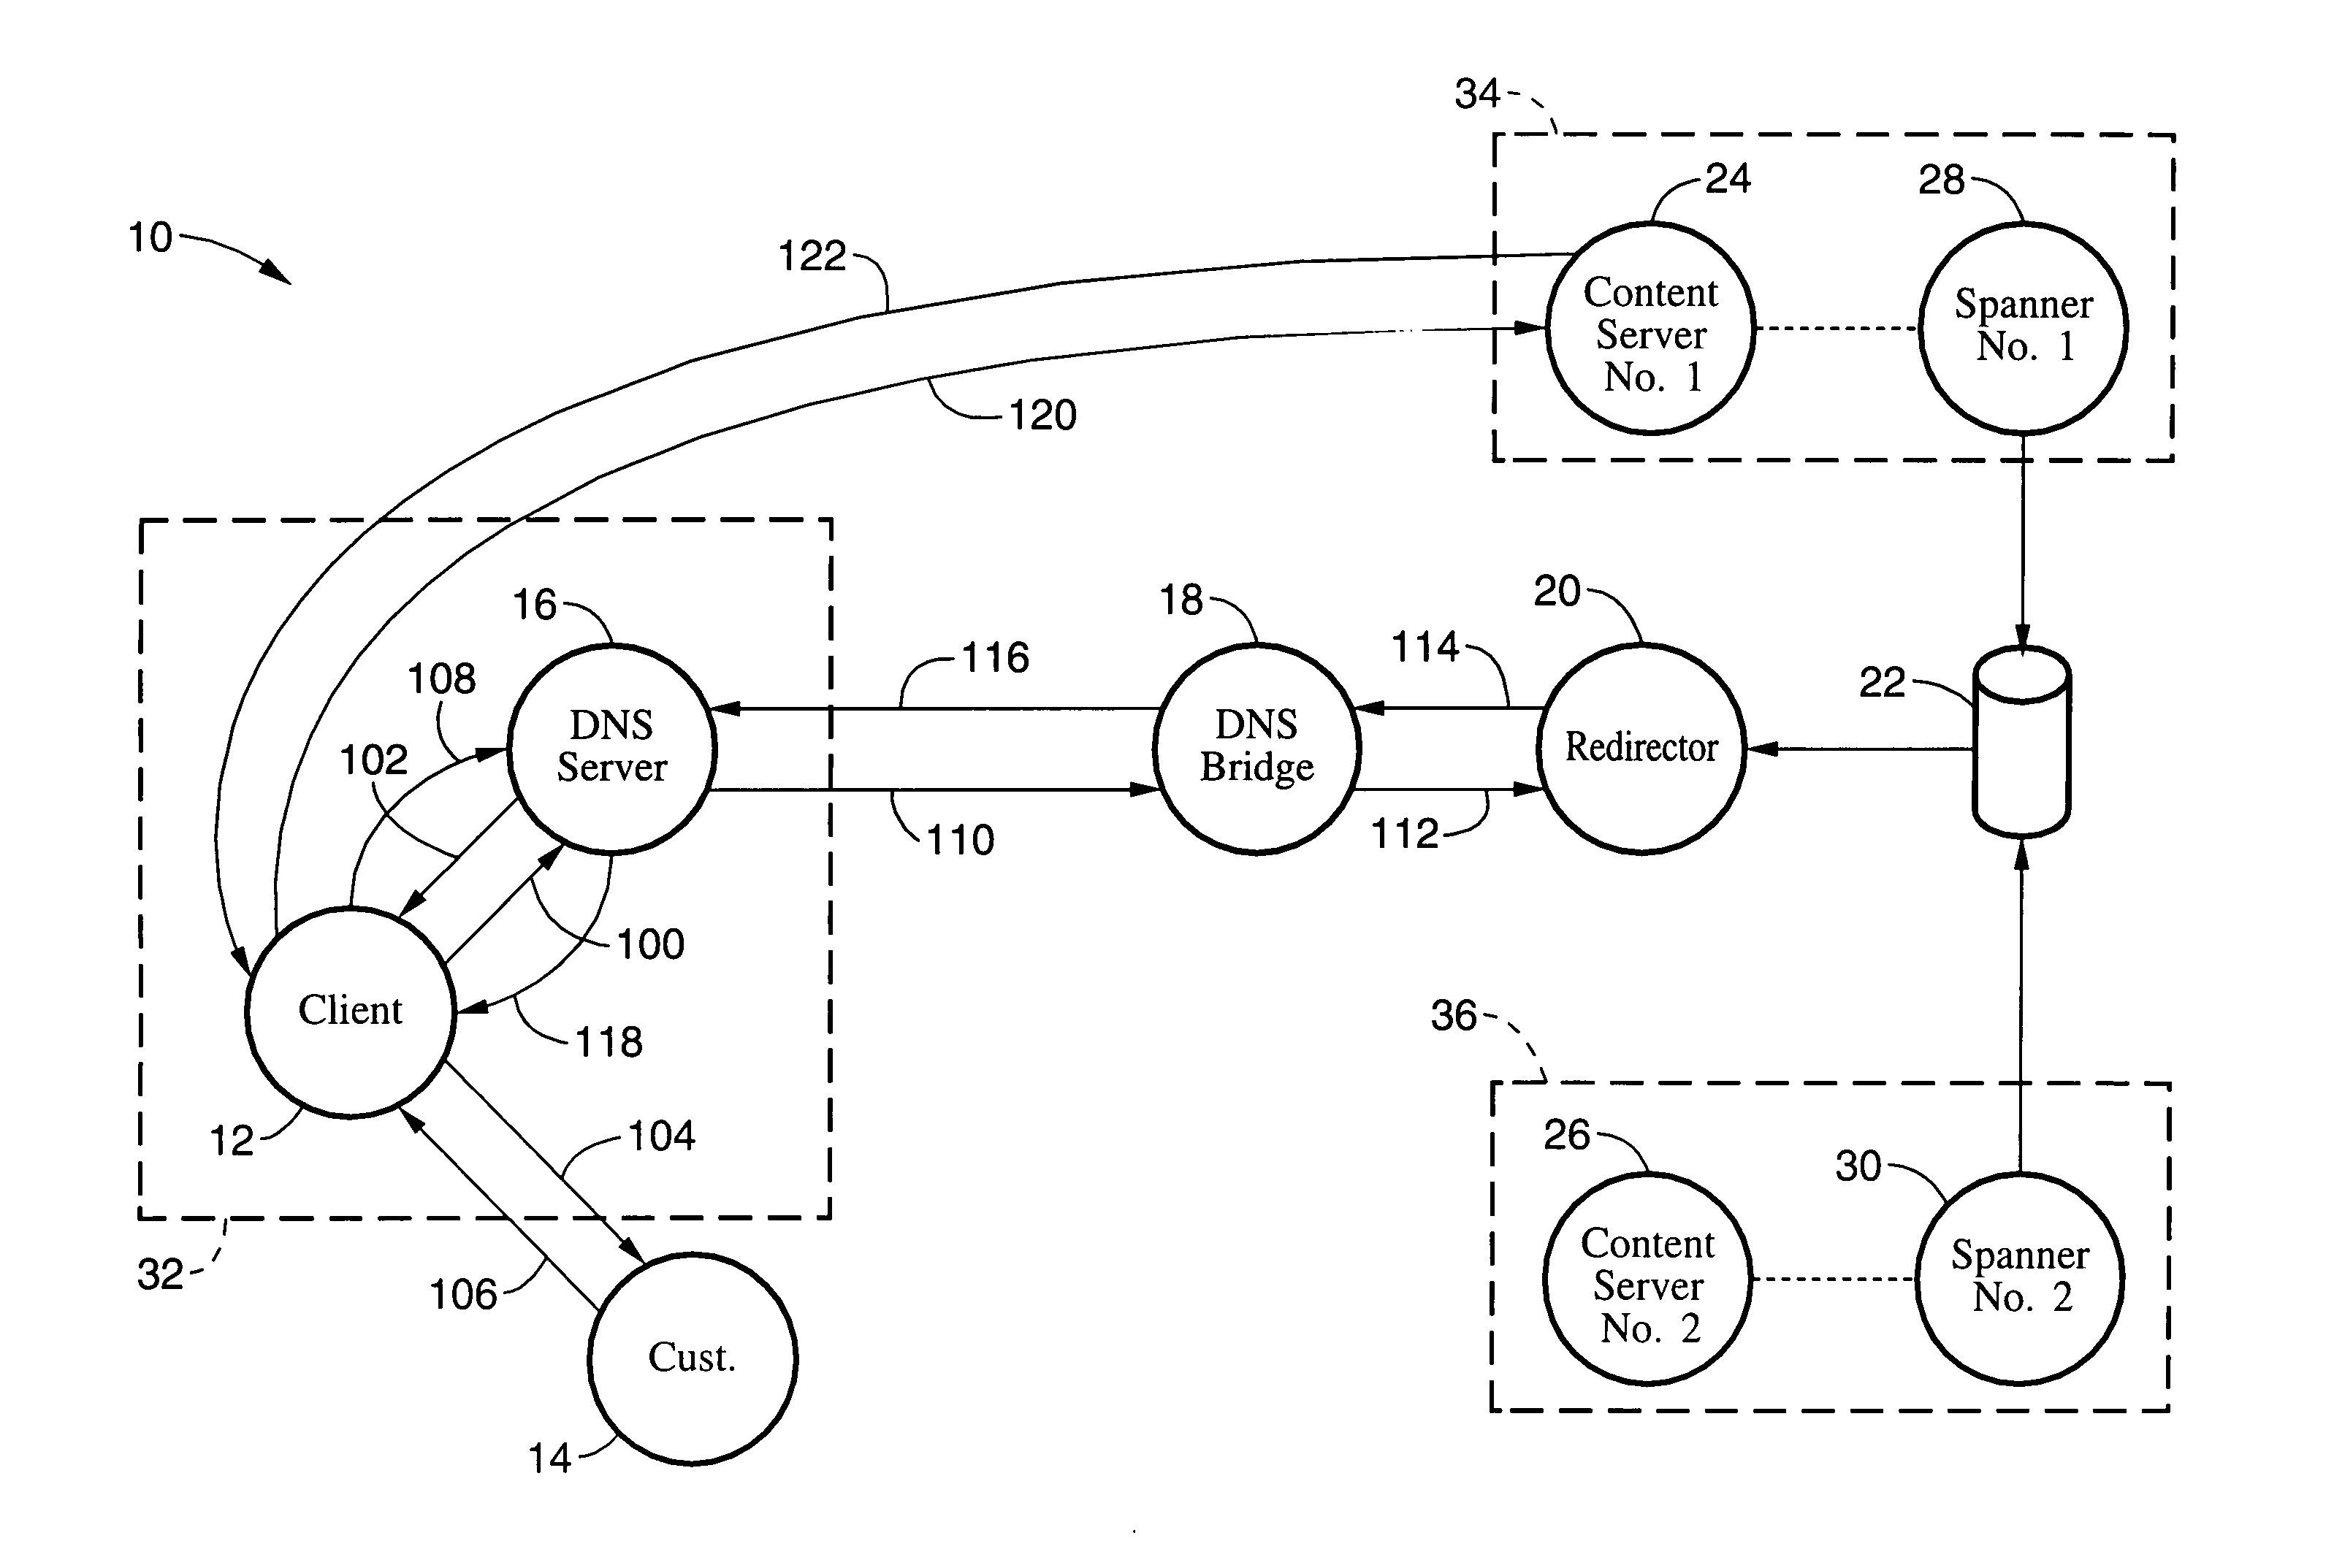 Method and system for directing requests for content to a content server based on network performance